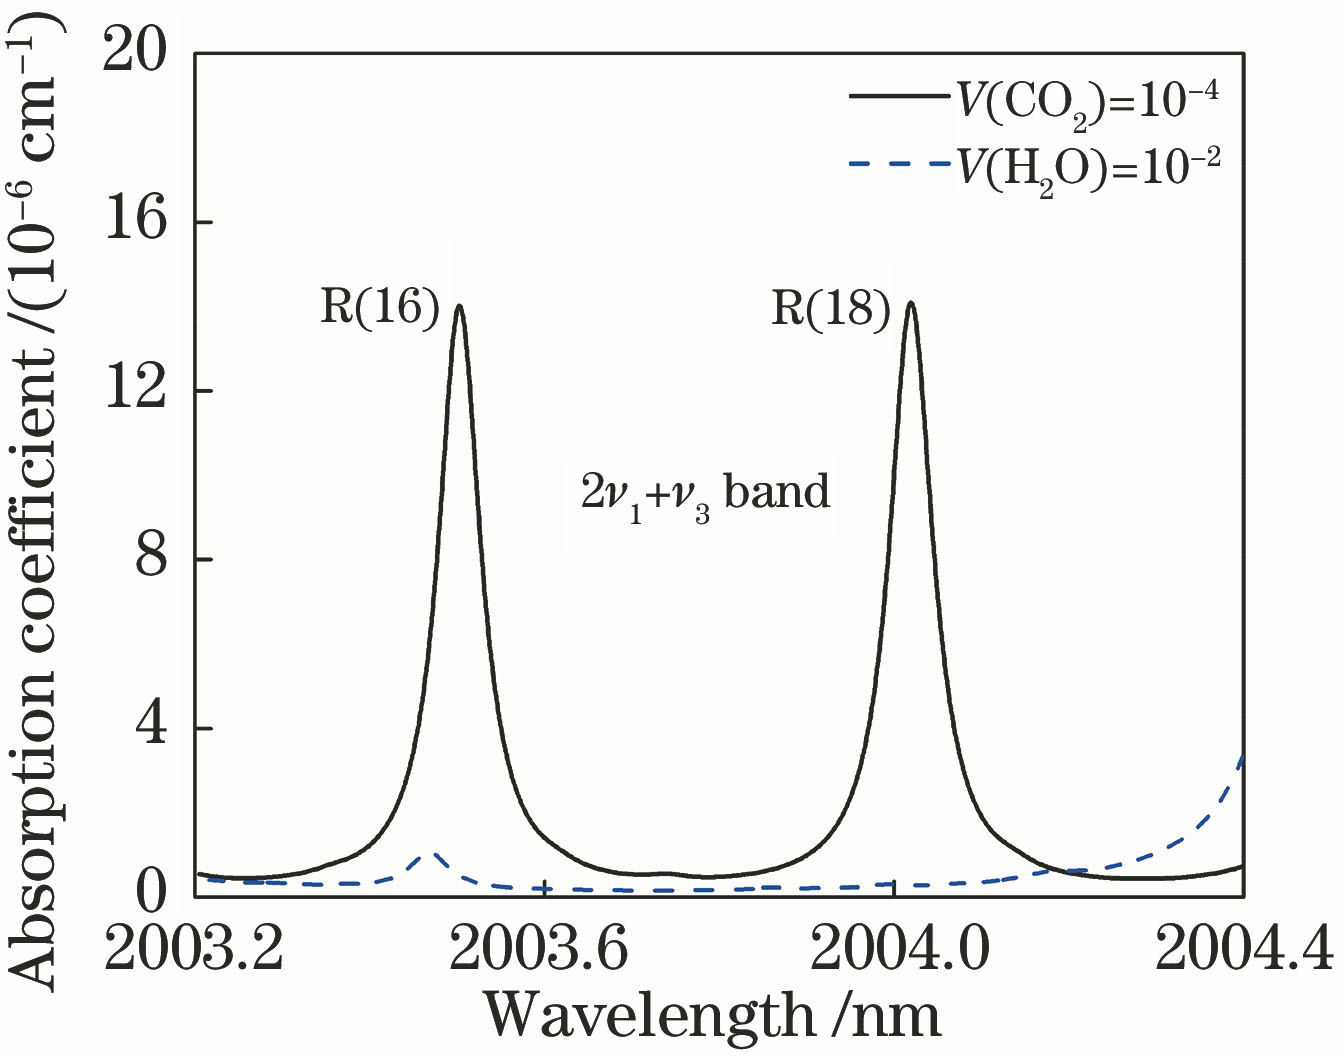 Calculated absorption lines of CO2 and H2O at 296 K and 1.01×105 N/m2 from HITRAN2016